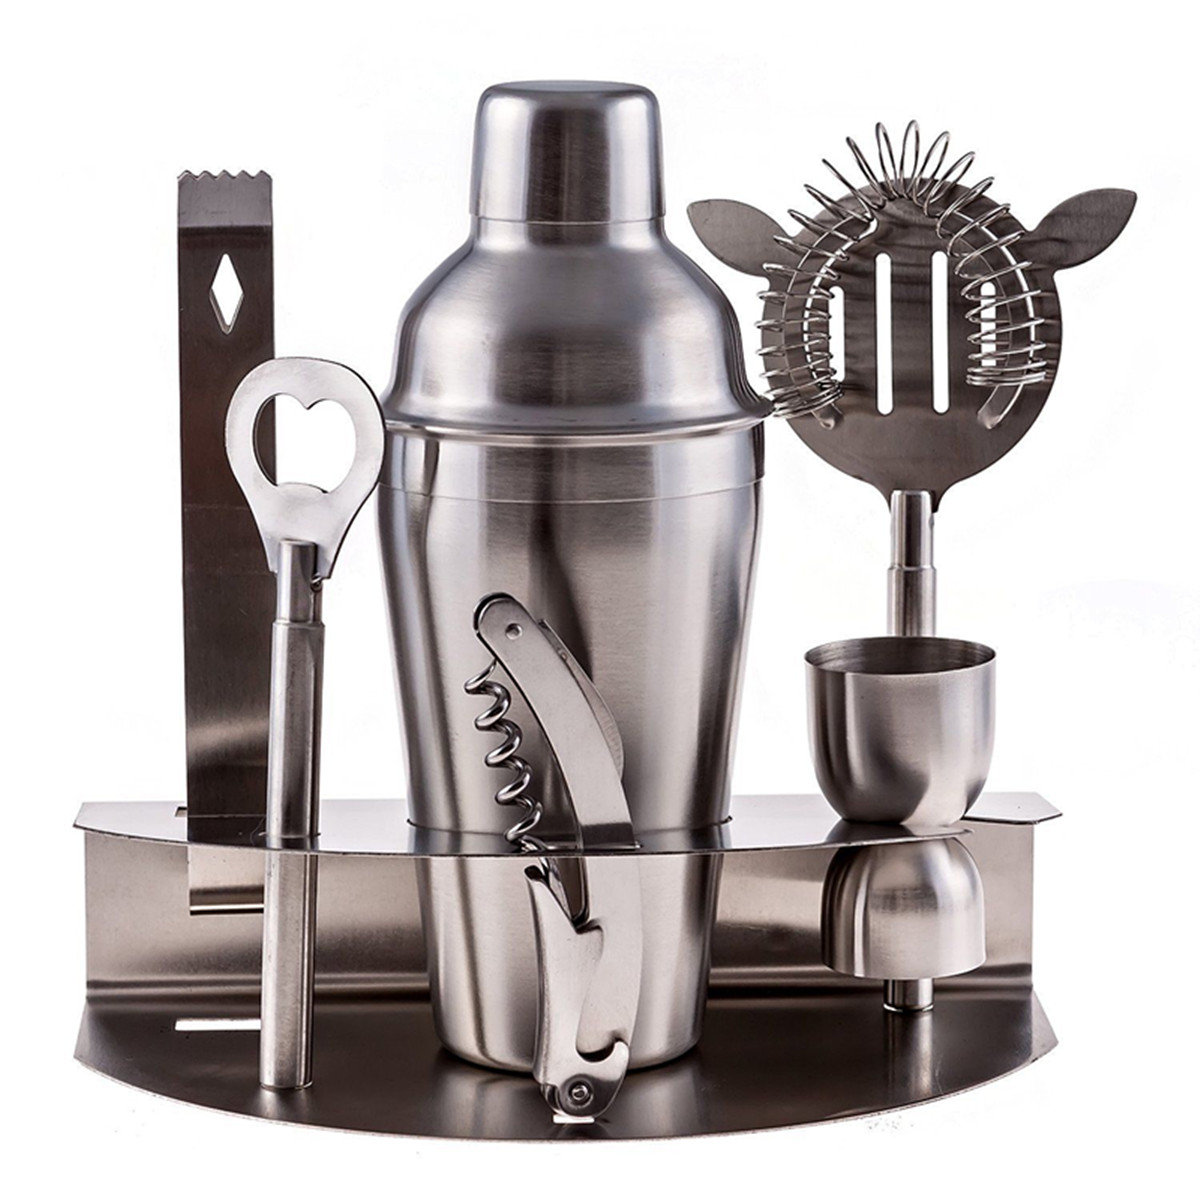 

7PCS Stainless Steel Cocktail Shakers Mixer Drink Bartender i Bar Set Tools Kit